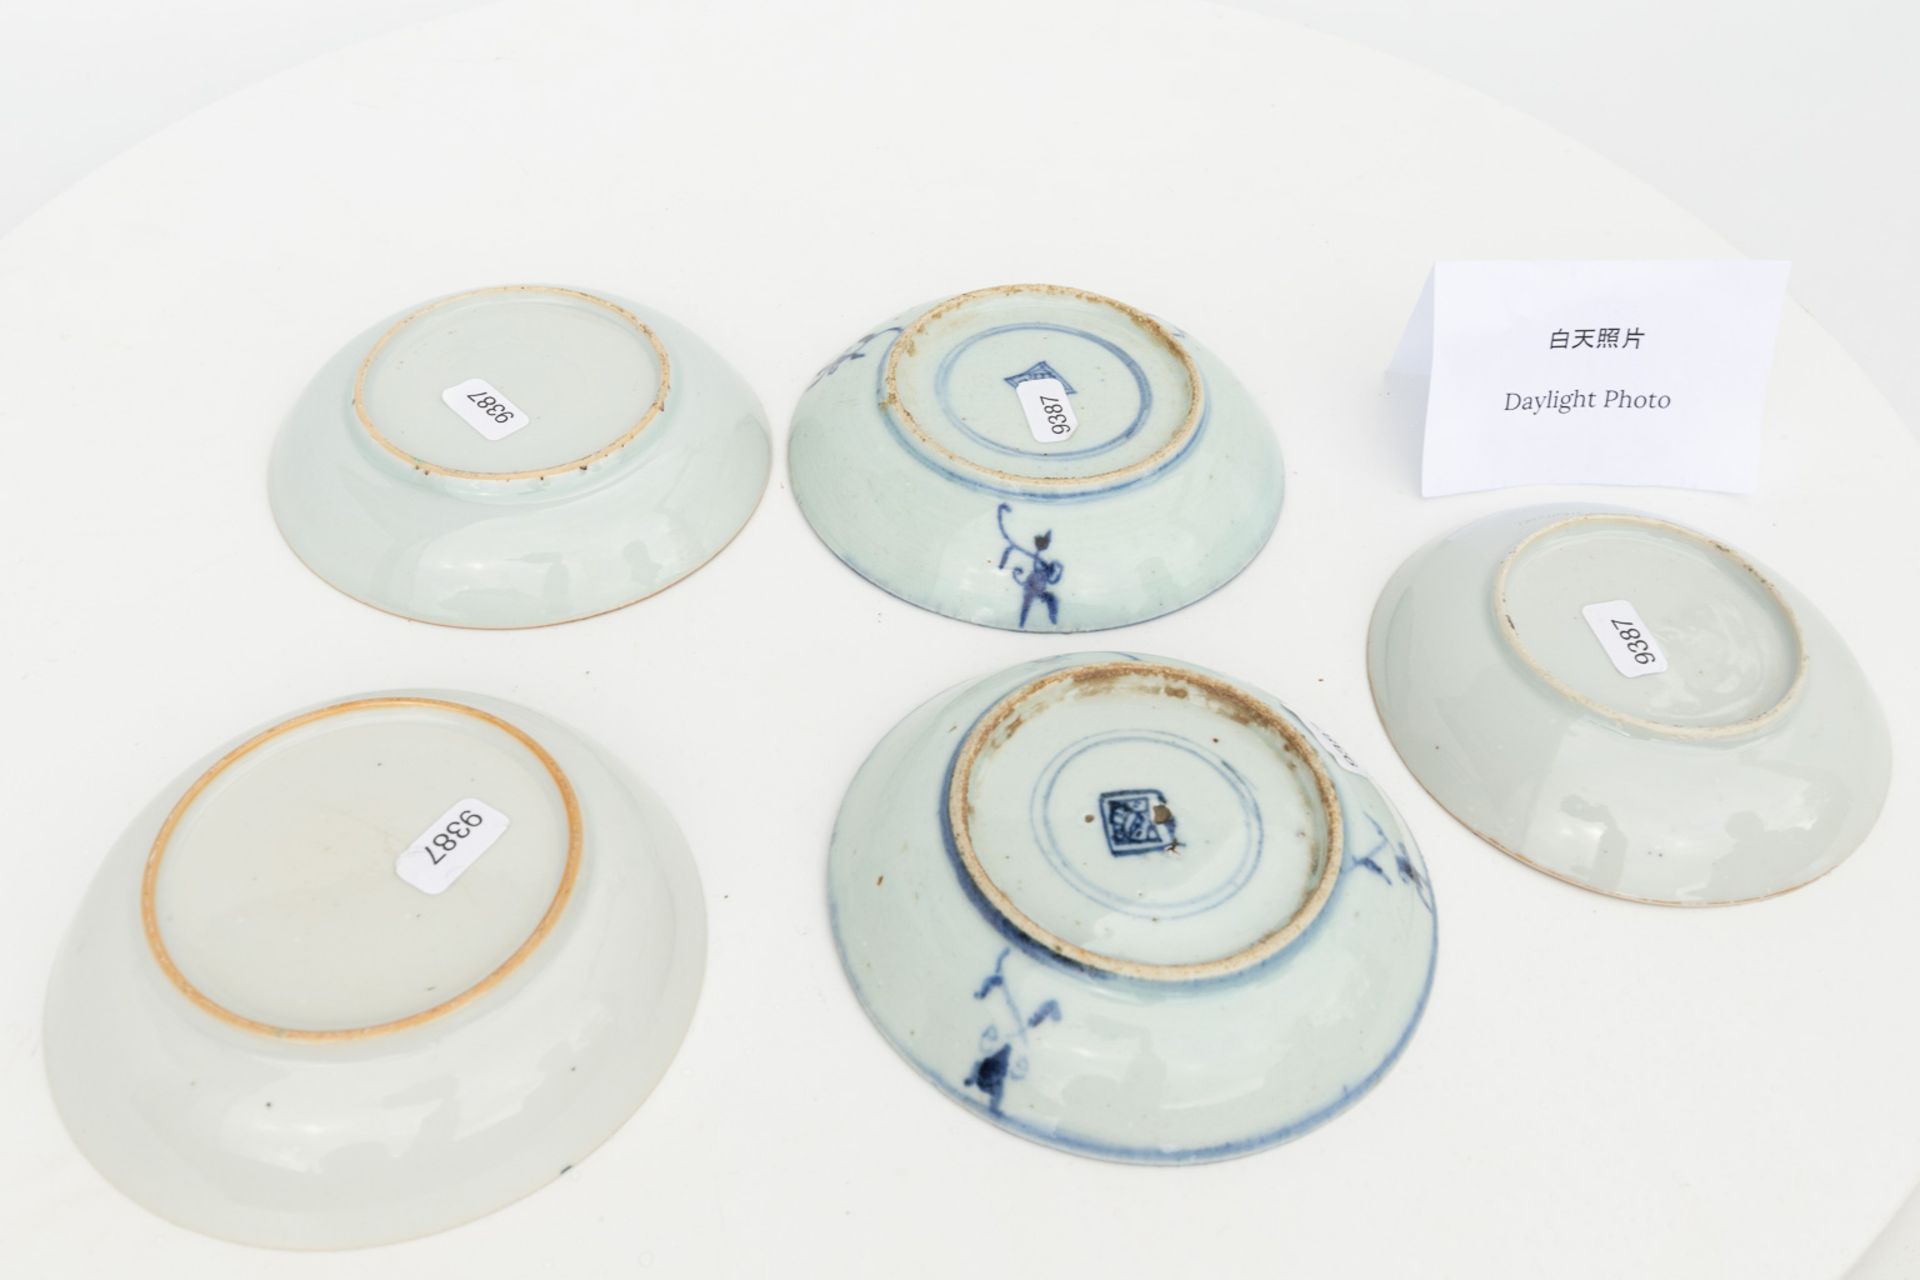 A collection of 5 plates made of Chinese porcelain with different patterns. - Image 14 of 15